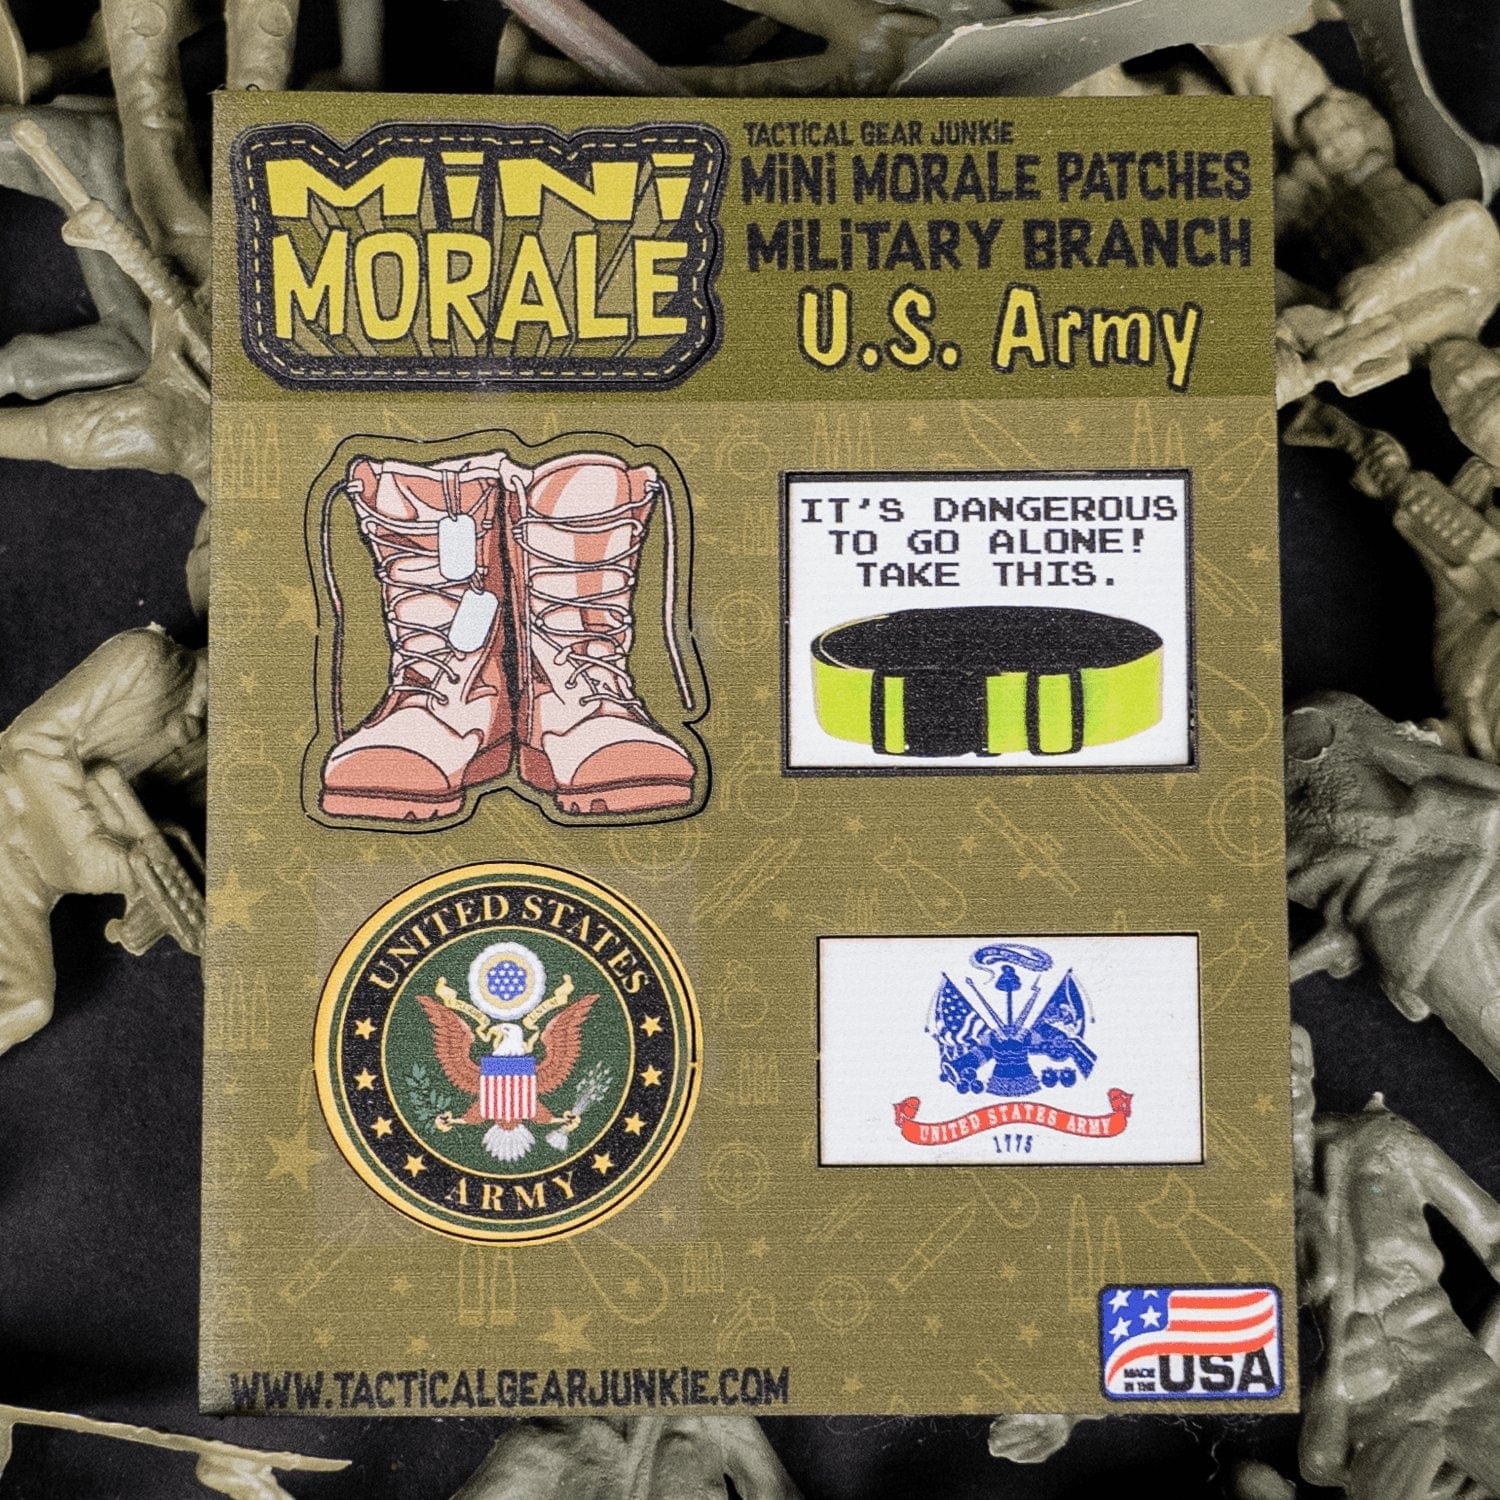 US Army patch